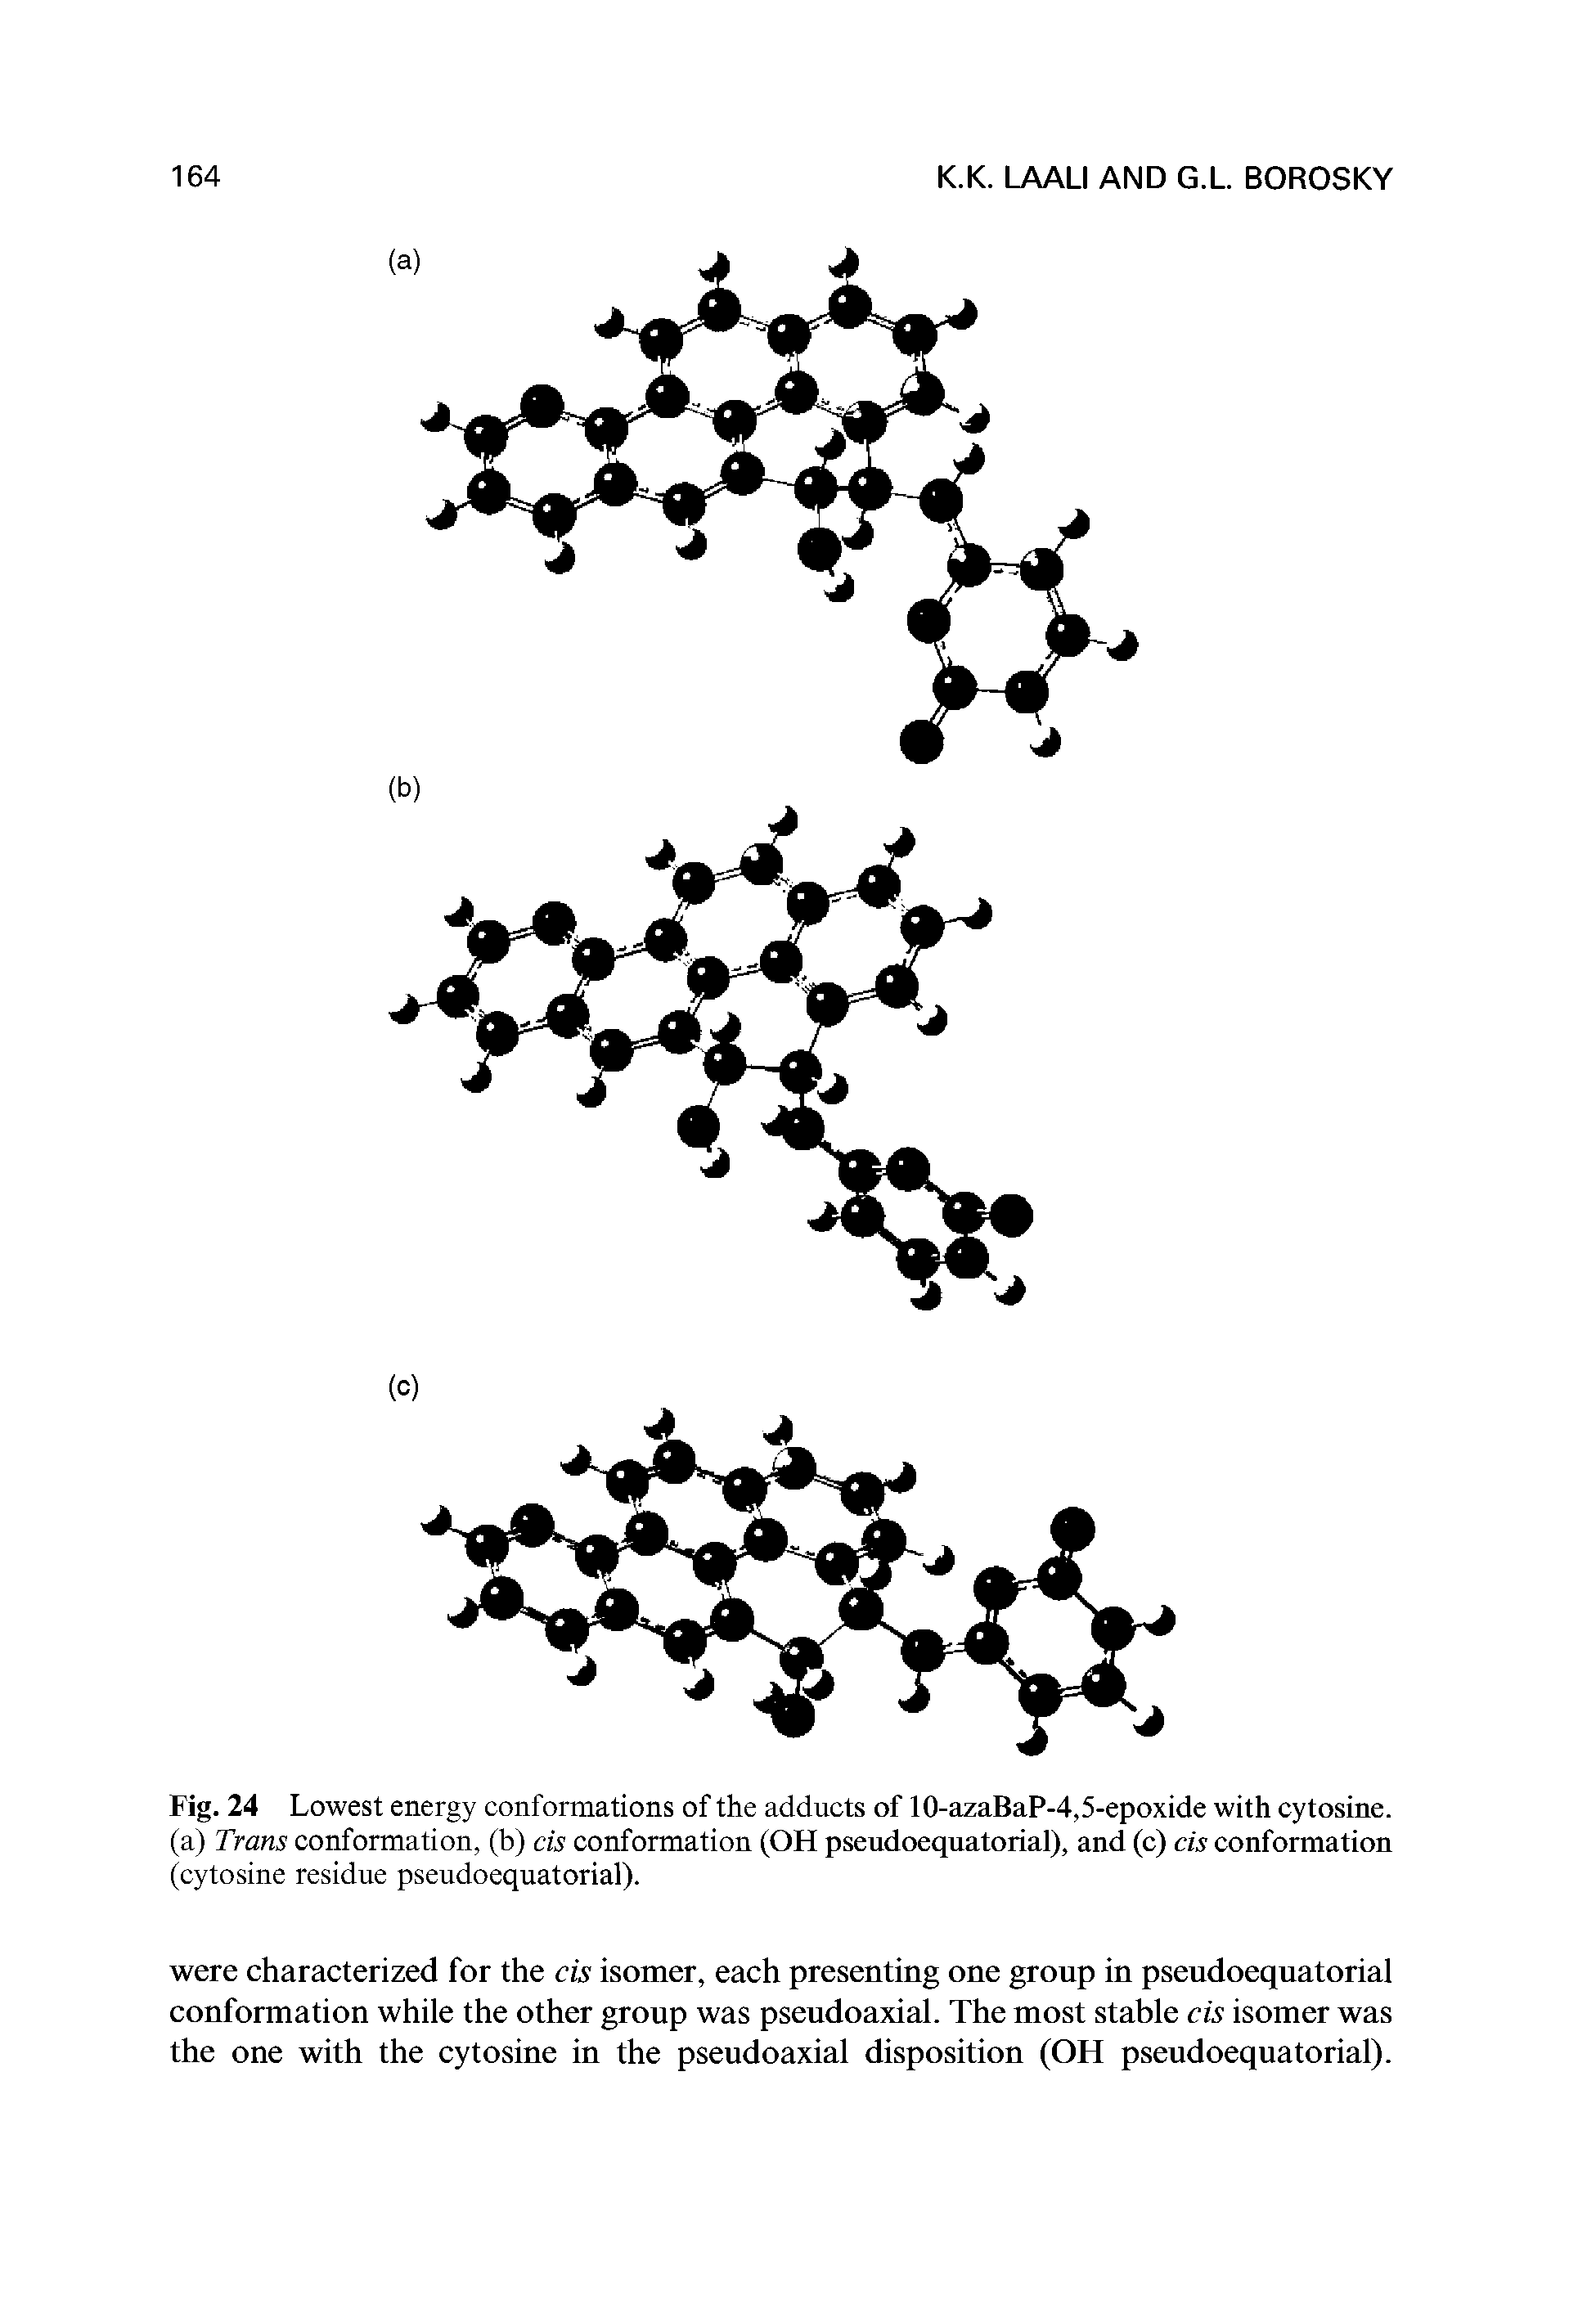 Fig. 24 Lowest energy conformations of the adducts of lO-azaBaP-4,5-epoxide with cytosine, (a) Trans conformation, (b) cis conformation (OH pseudoequatorial), and (c) cis conformation (cytosine residue pseudoequatorial).